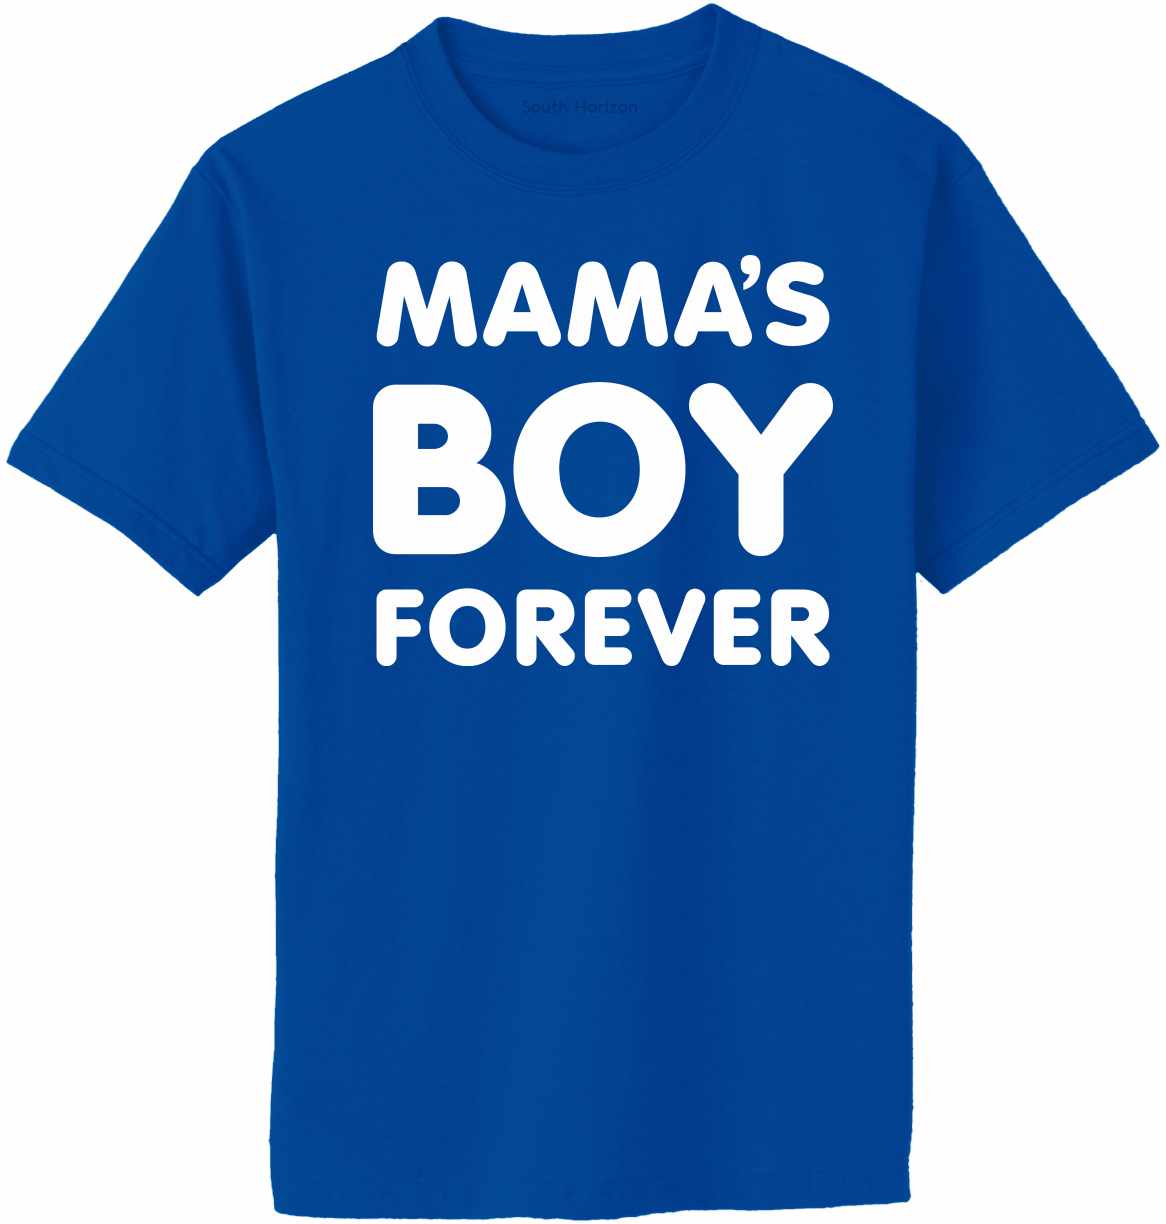 Mama's Boy Forever on Adult T-Shirt